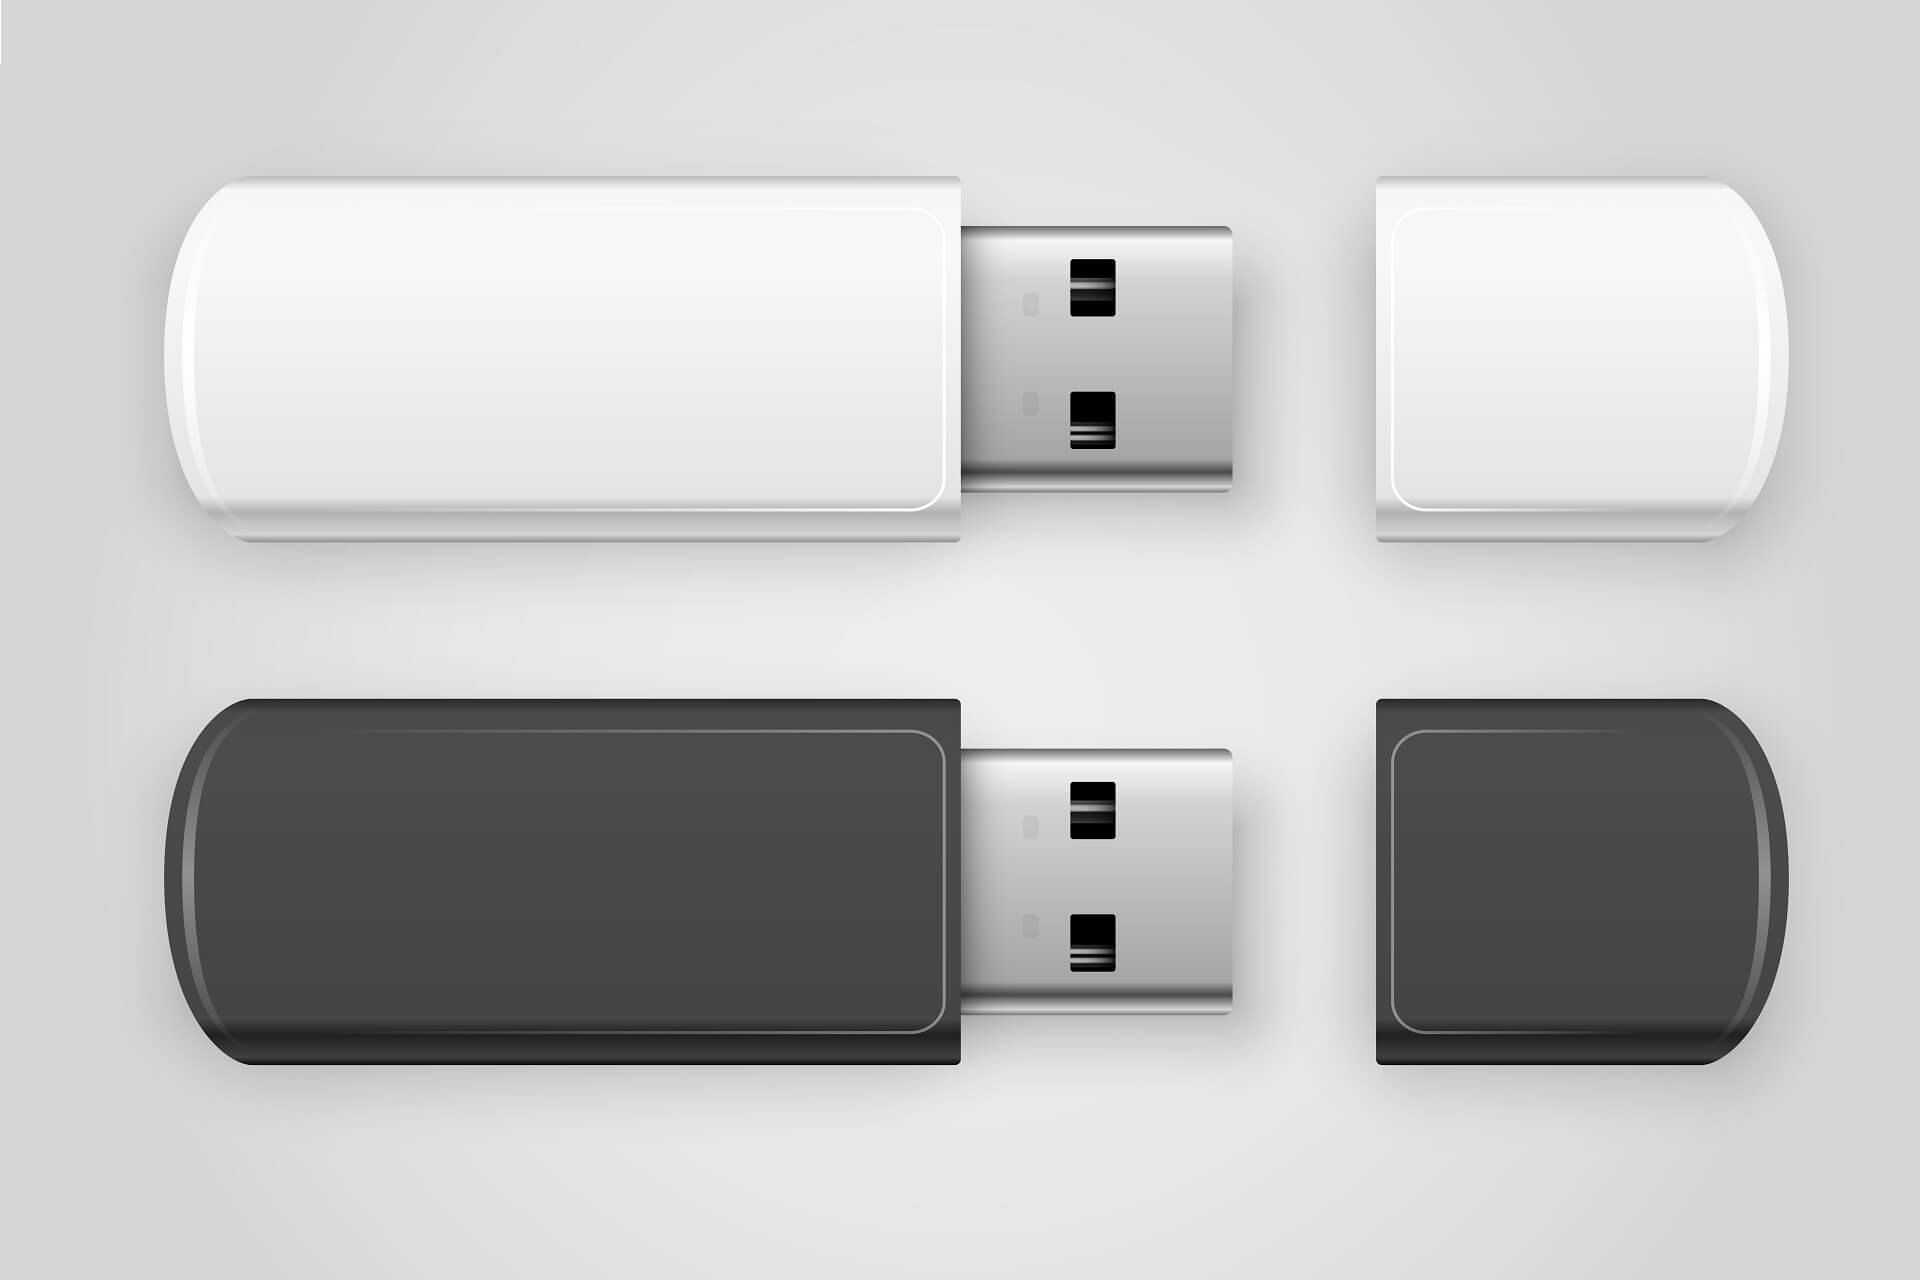 make apartition usb for a mac using mini tool partitioning